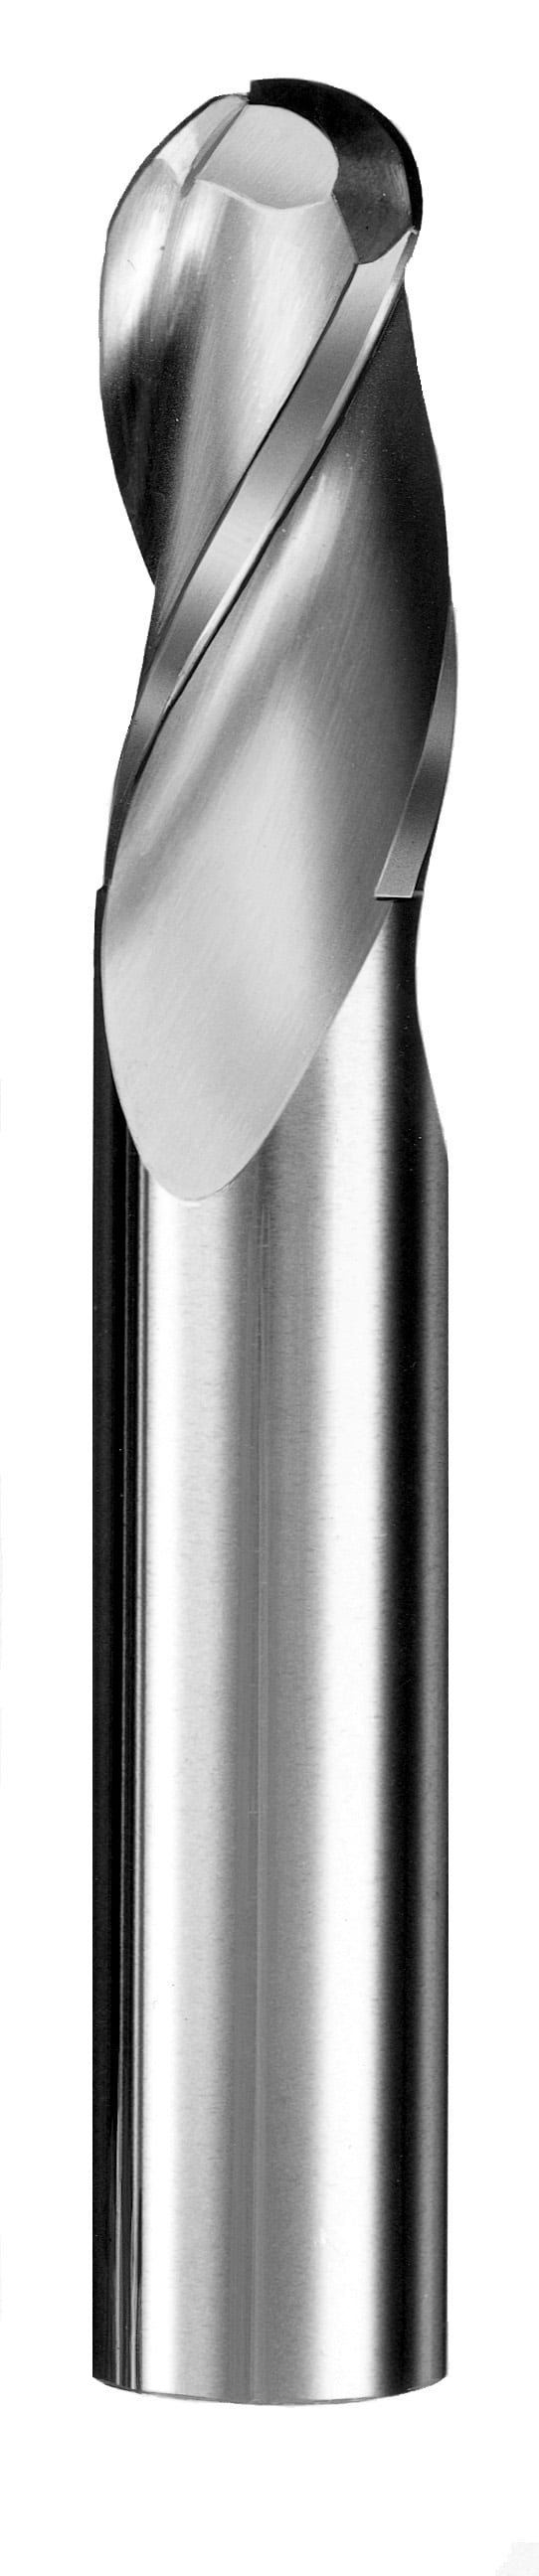 1/8" Dia, 3 Flute, Ball Nose End Mill - 30516